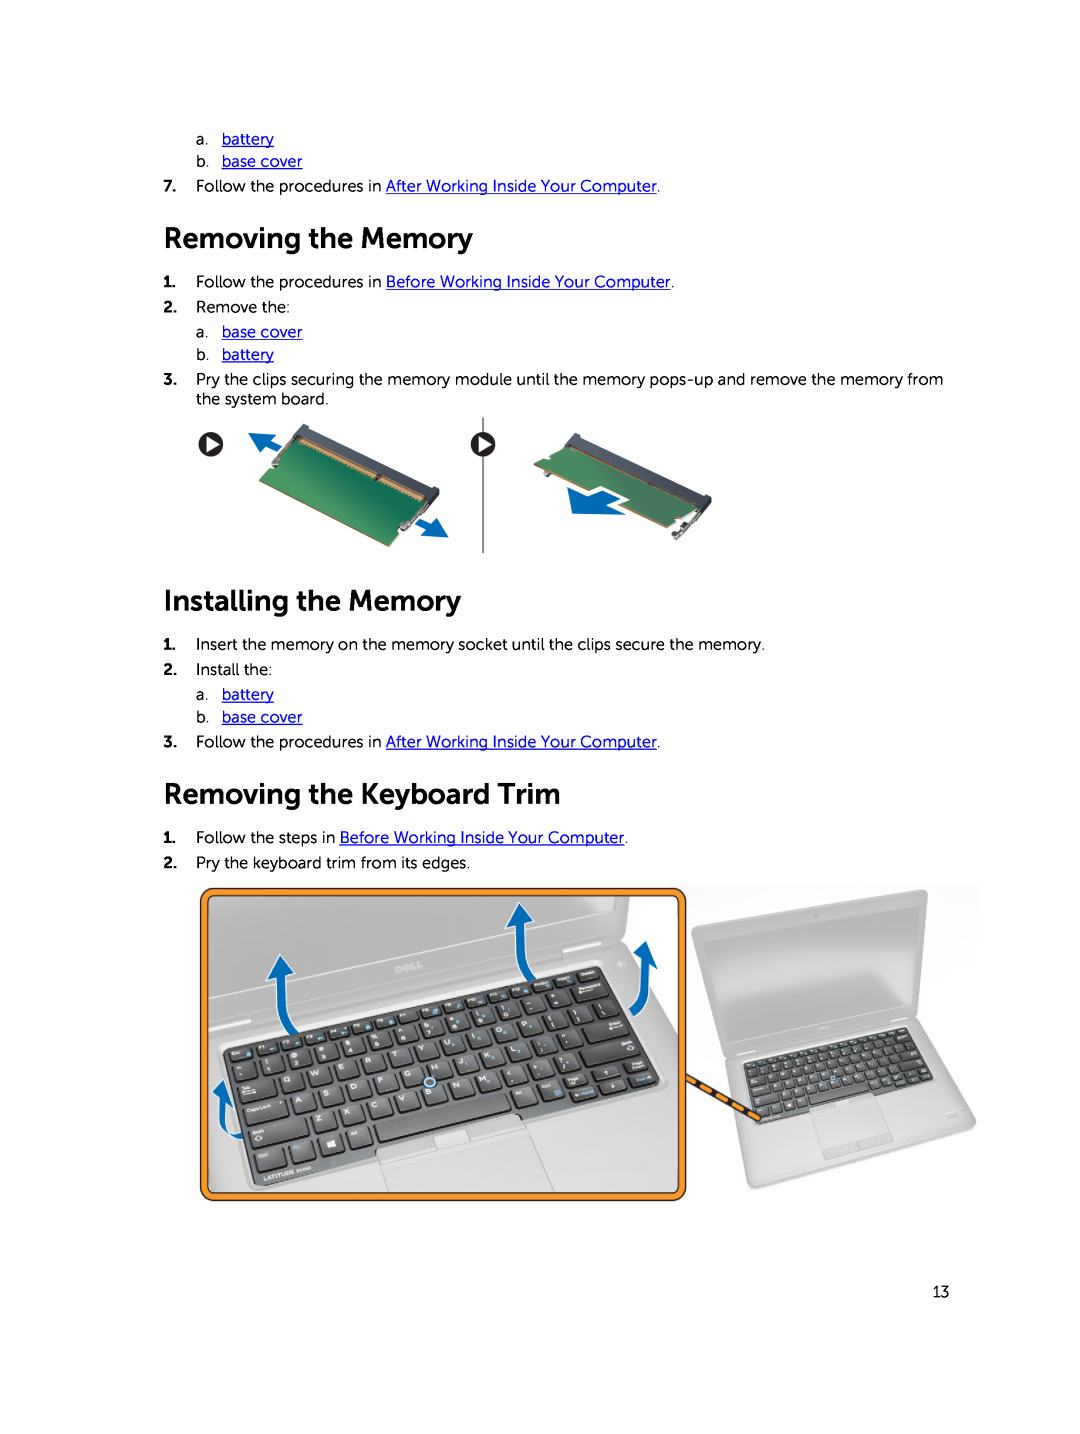 Dell E5450 owner manual Removing the Memory, Installing the Memory, Removing the Keyboard Trim 